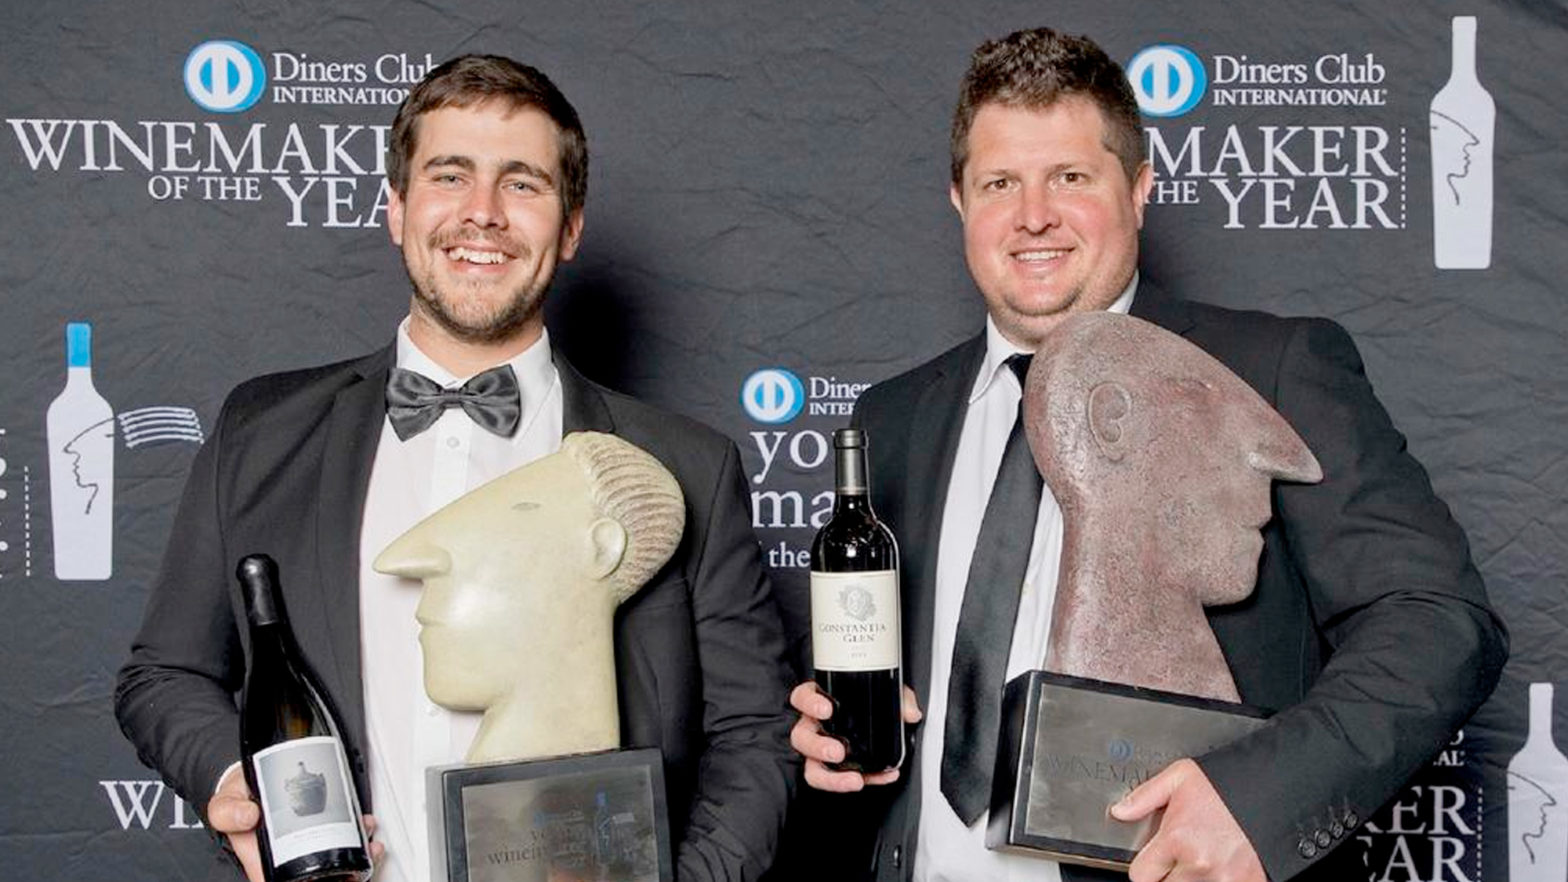 Winemaker of the Year